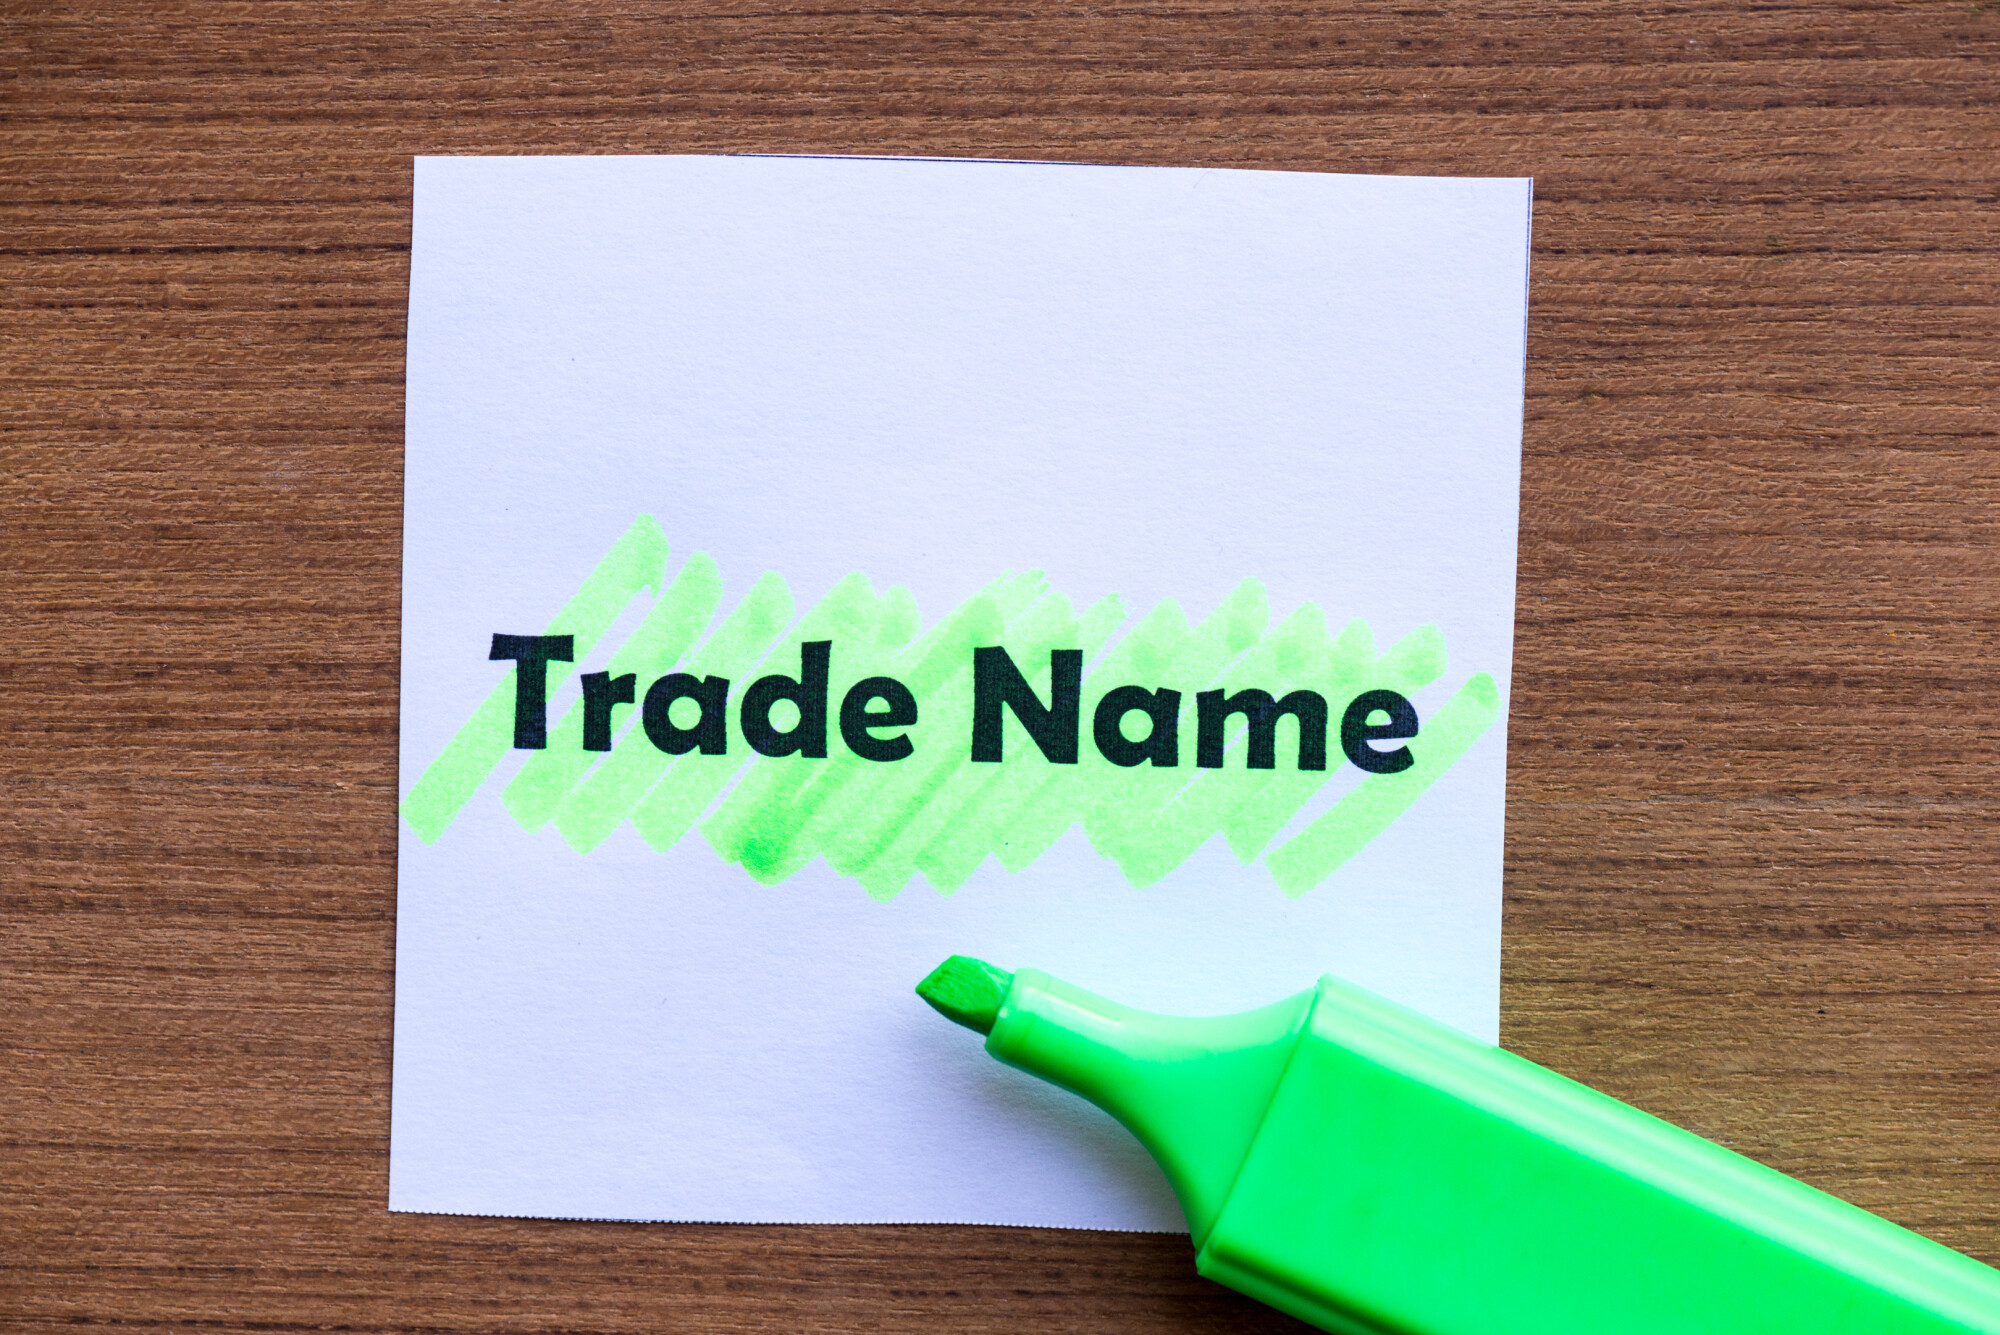 Trade Names in Green Marker